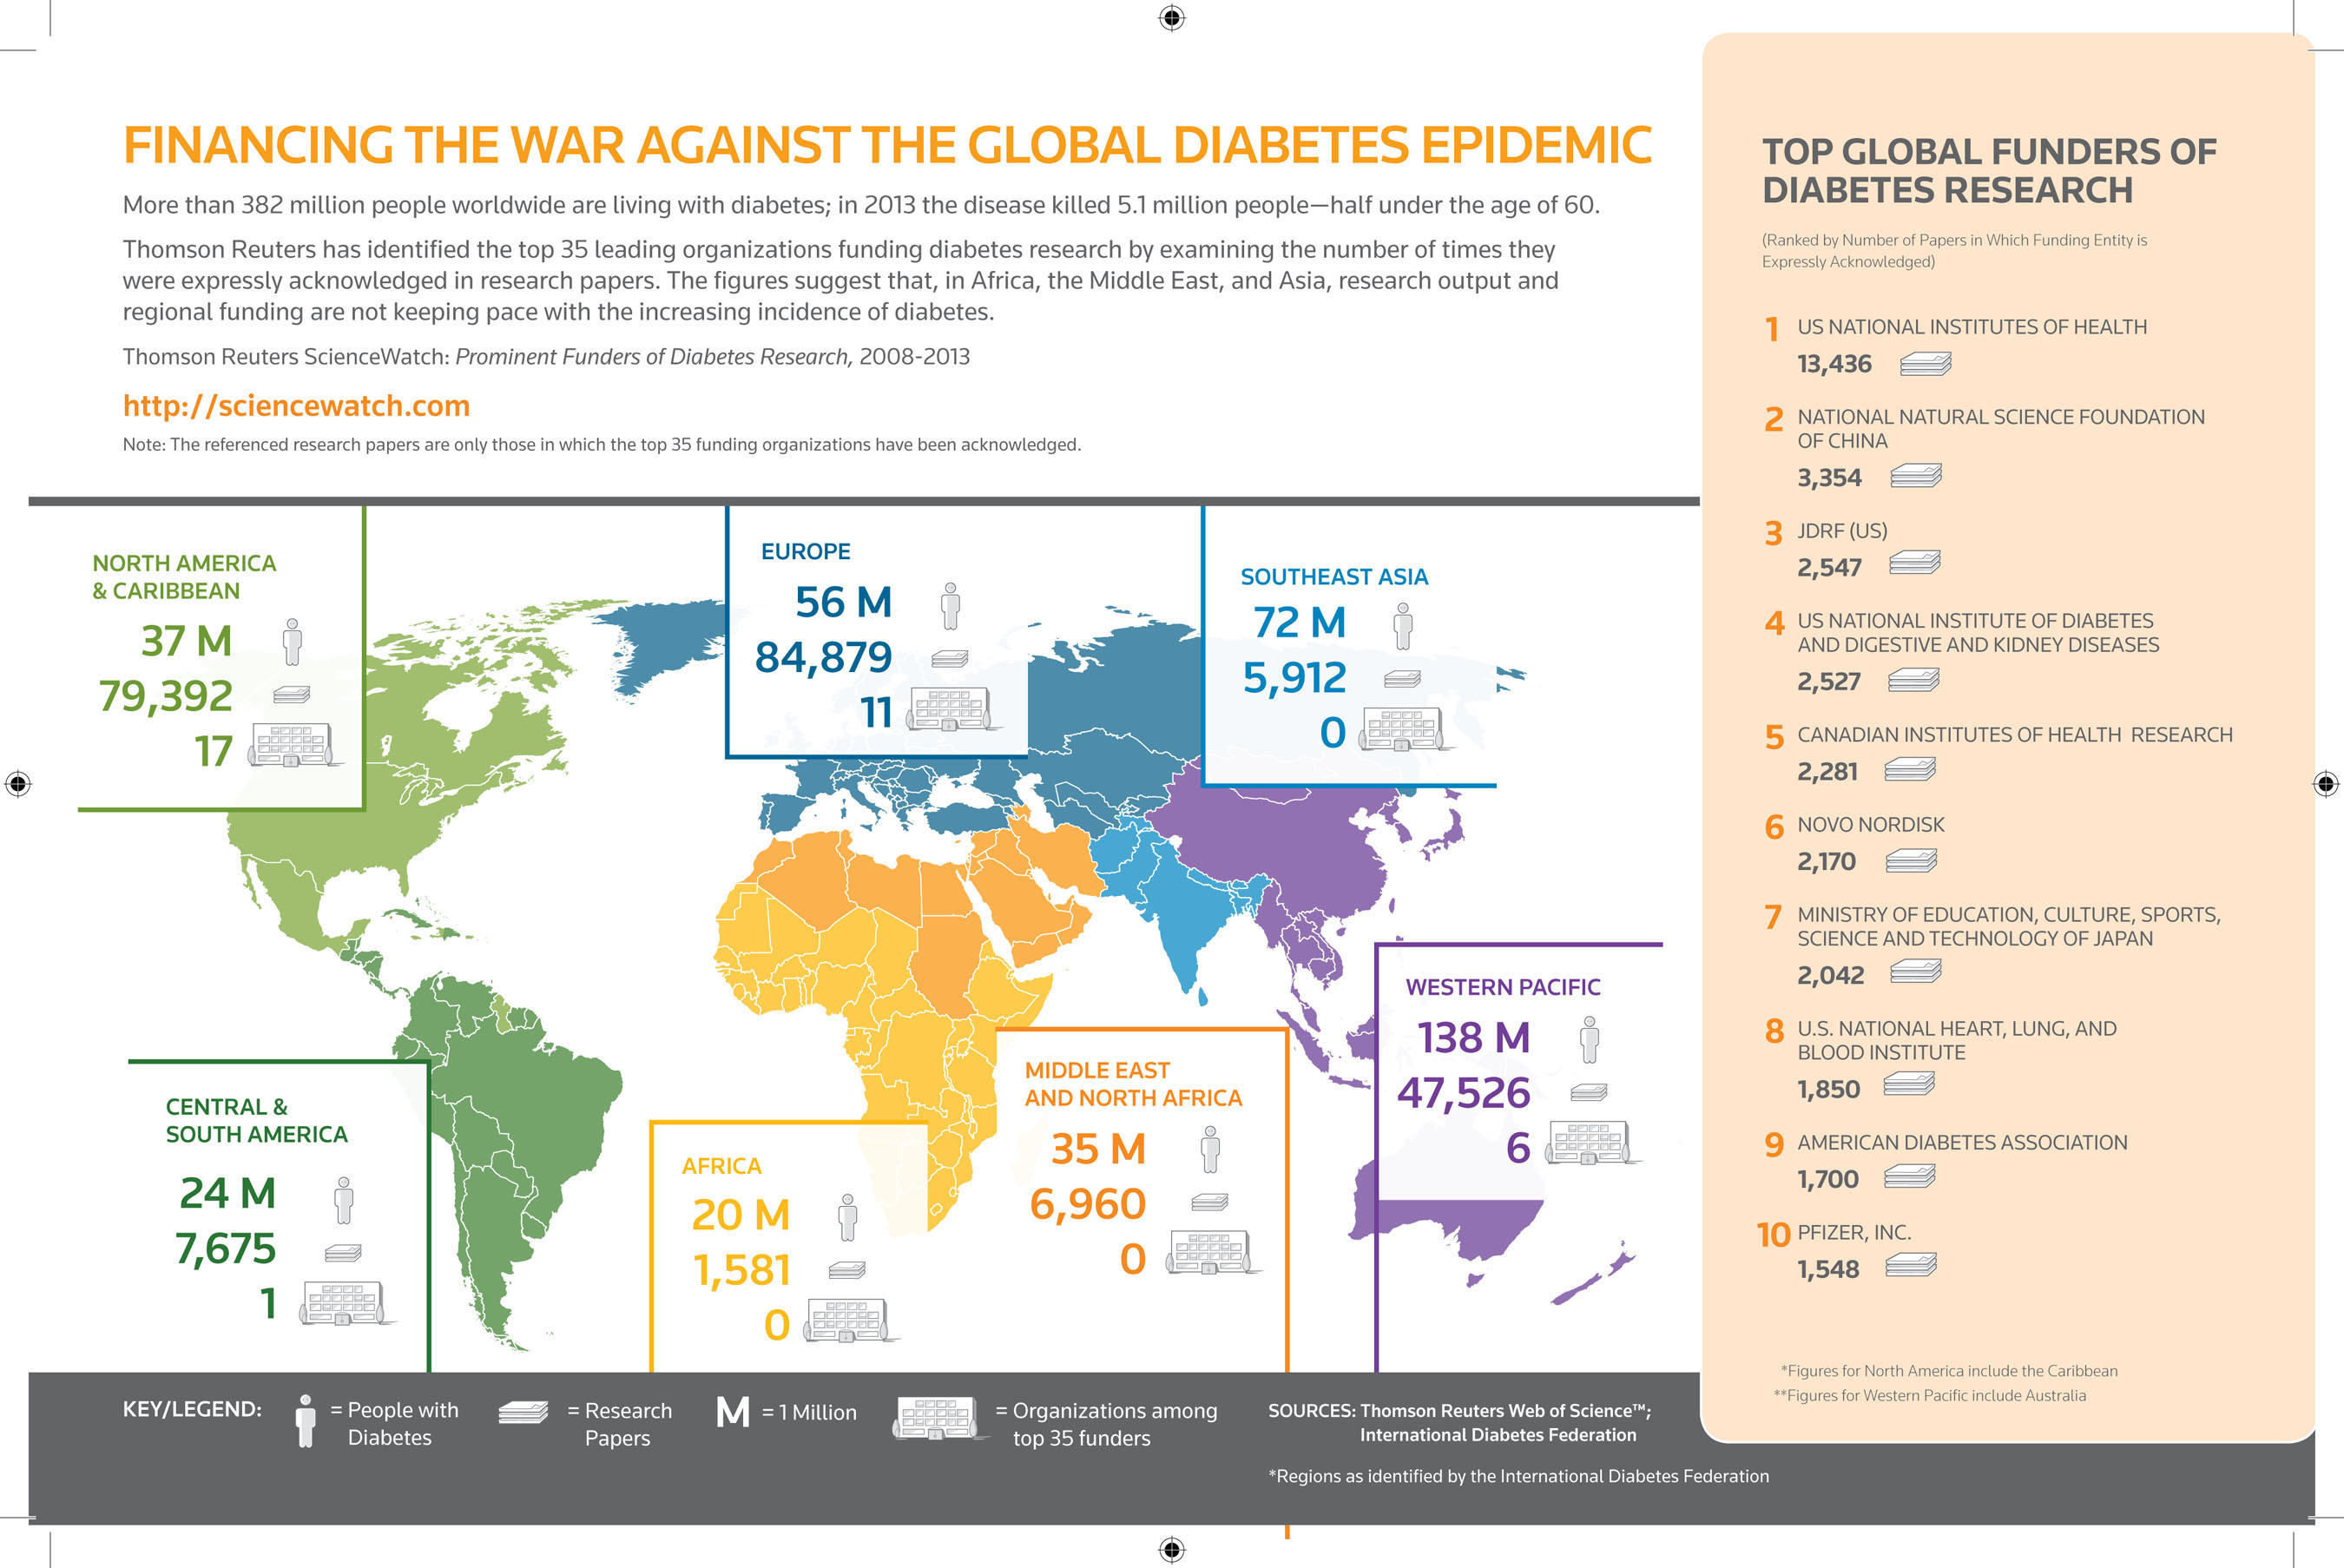 Thomson Reuters ScienceWatch.com analysts trace the funding of diabetes research and illustrate the discrepancy in where the largest populations are afflicted versus where research and funding is happening. More information at  http://sciencewatch.com/articles/funding-diabetes-research . (PRNewsFoto/Thomson Reuters) (PRNewsFoto/Thomson Reuters)